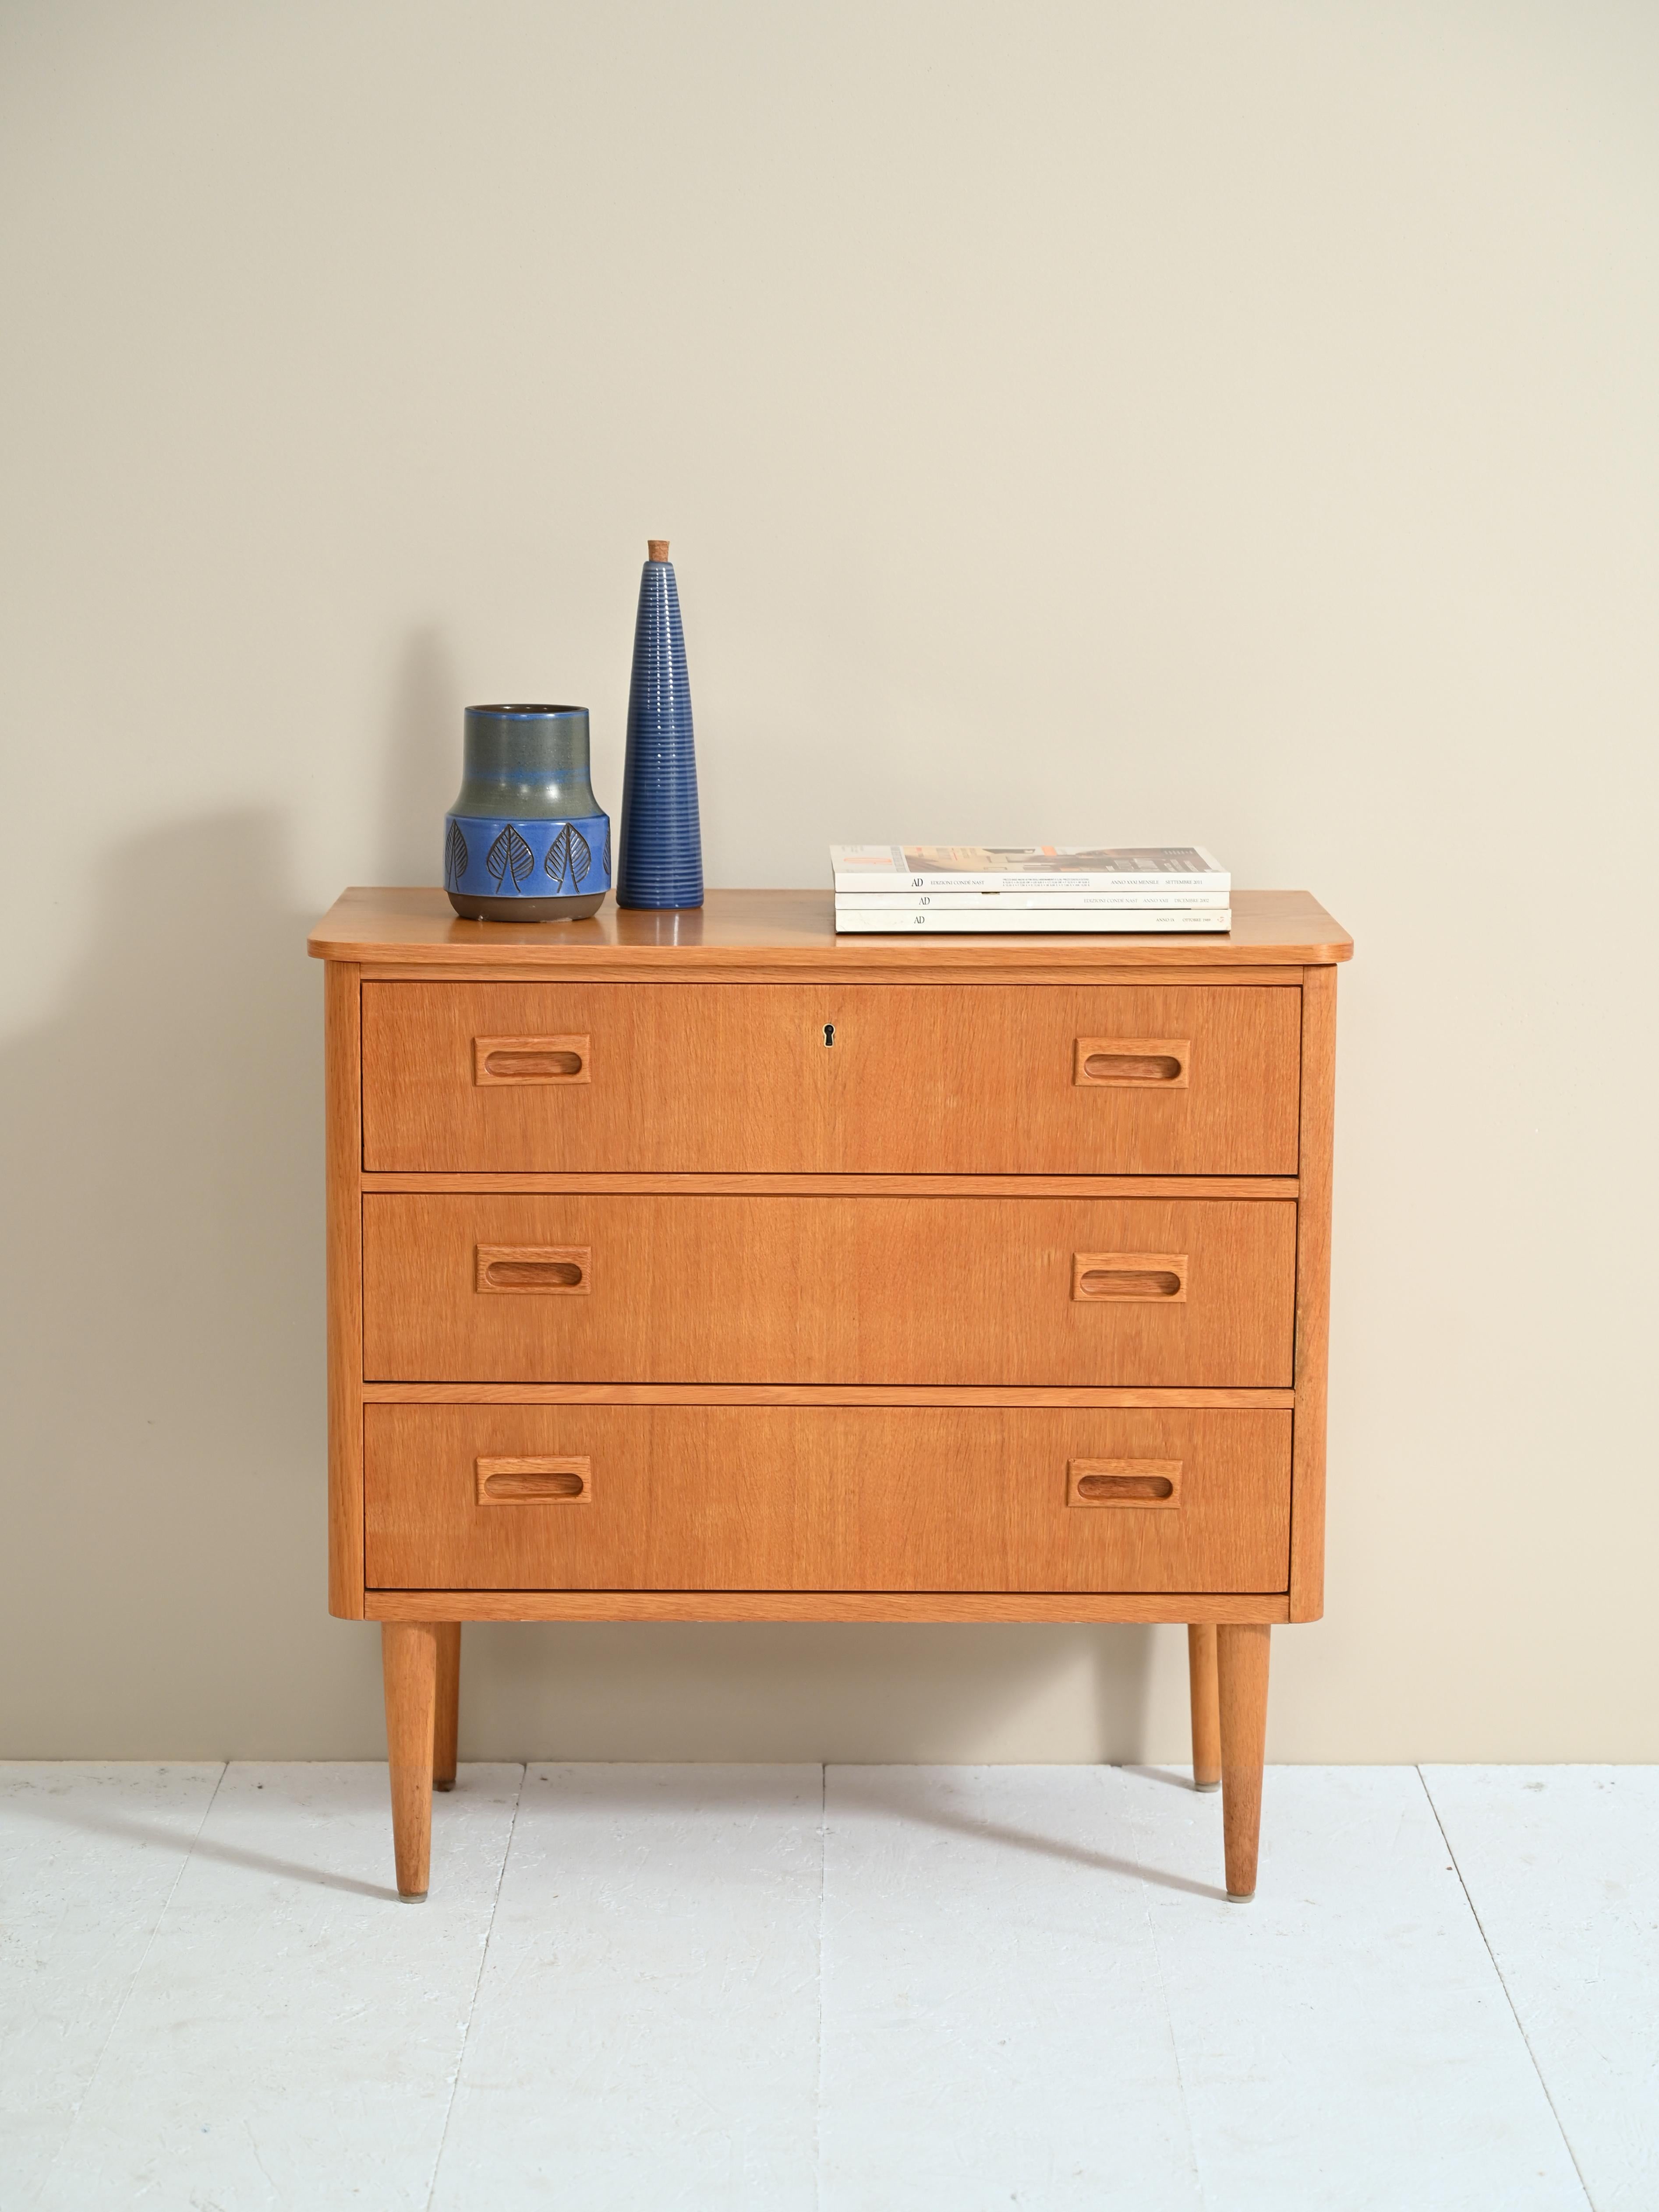 An original vintage chest of drawers from the 1960s, the Swedish provenance is evident in the quality and design of the clean, elegant shapes. 

There are three drawers with a finely carved wooden double handle and three locks that allow the drawers